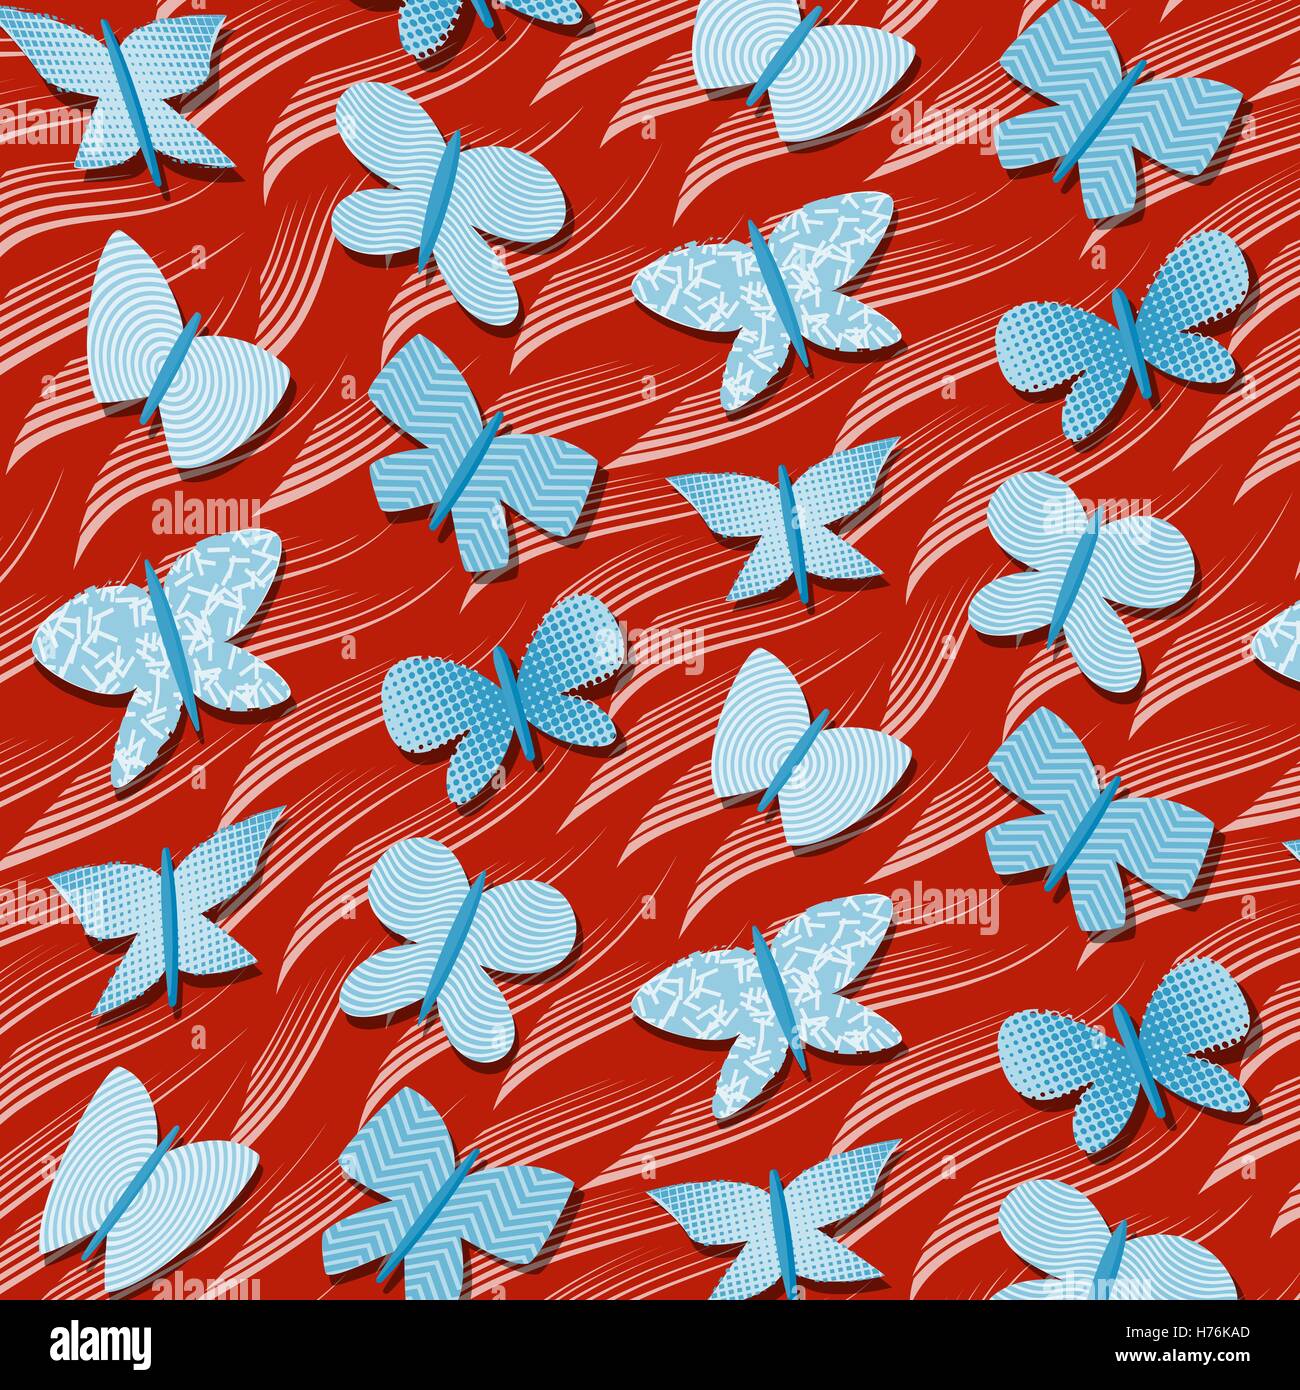 seamless repetitive pattern with butterflies Stock Vector